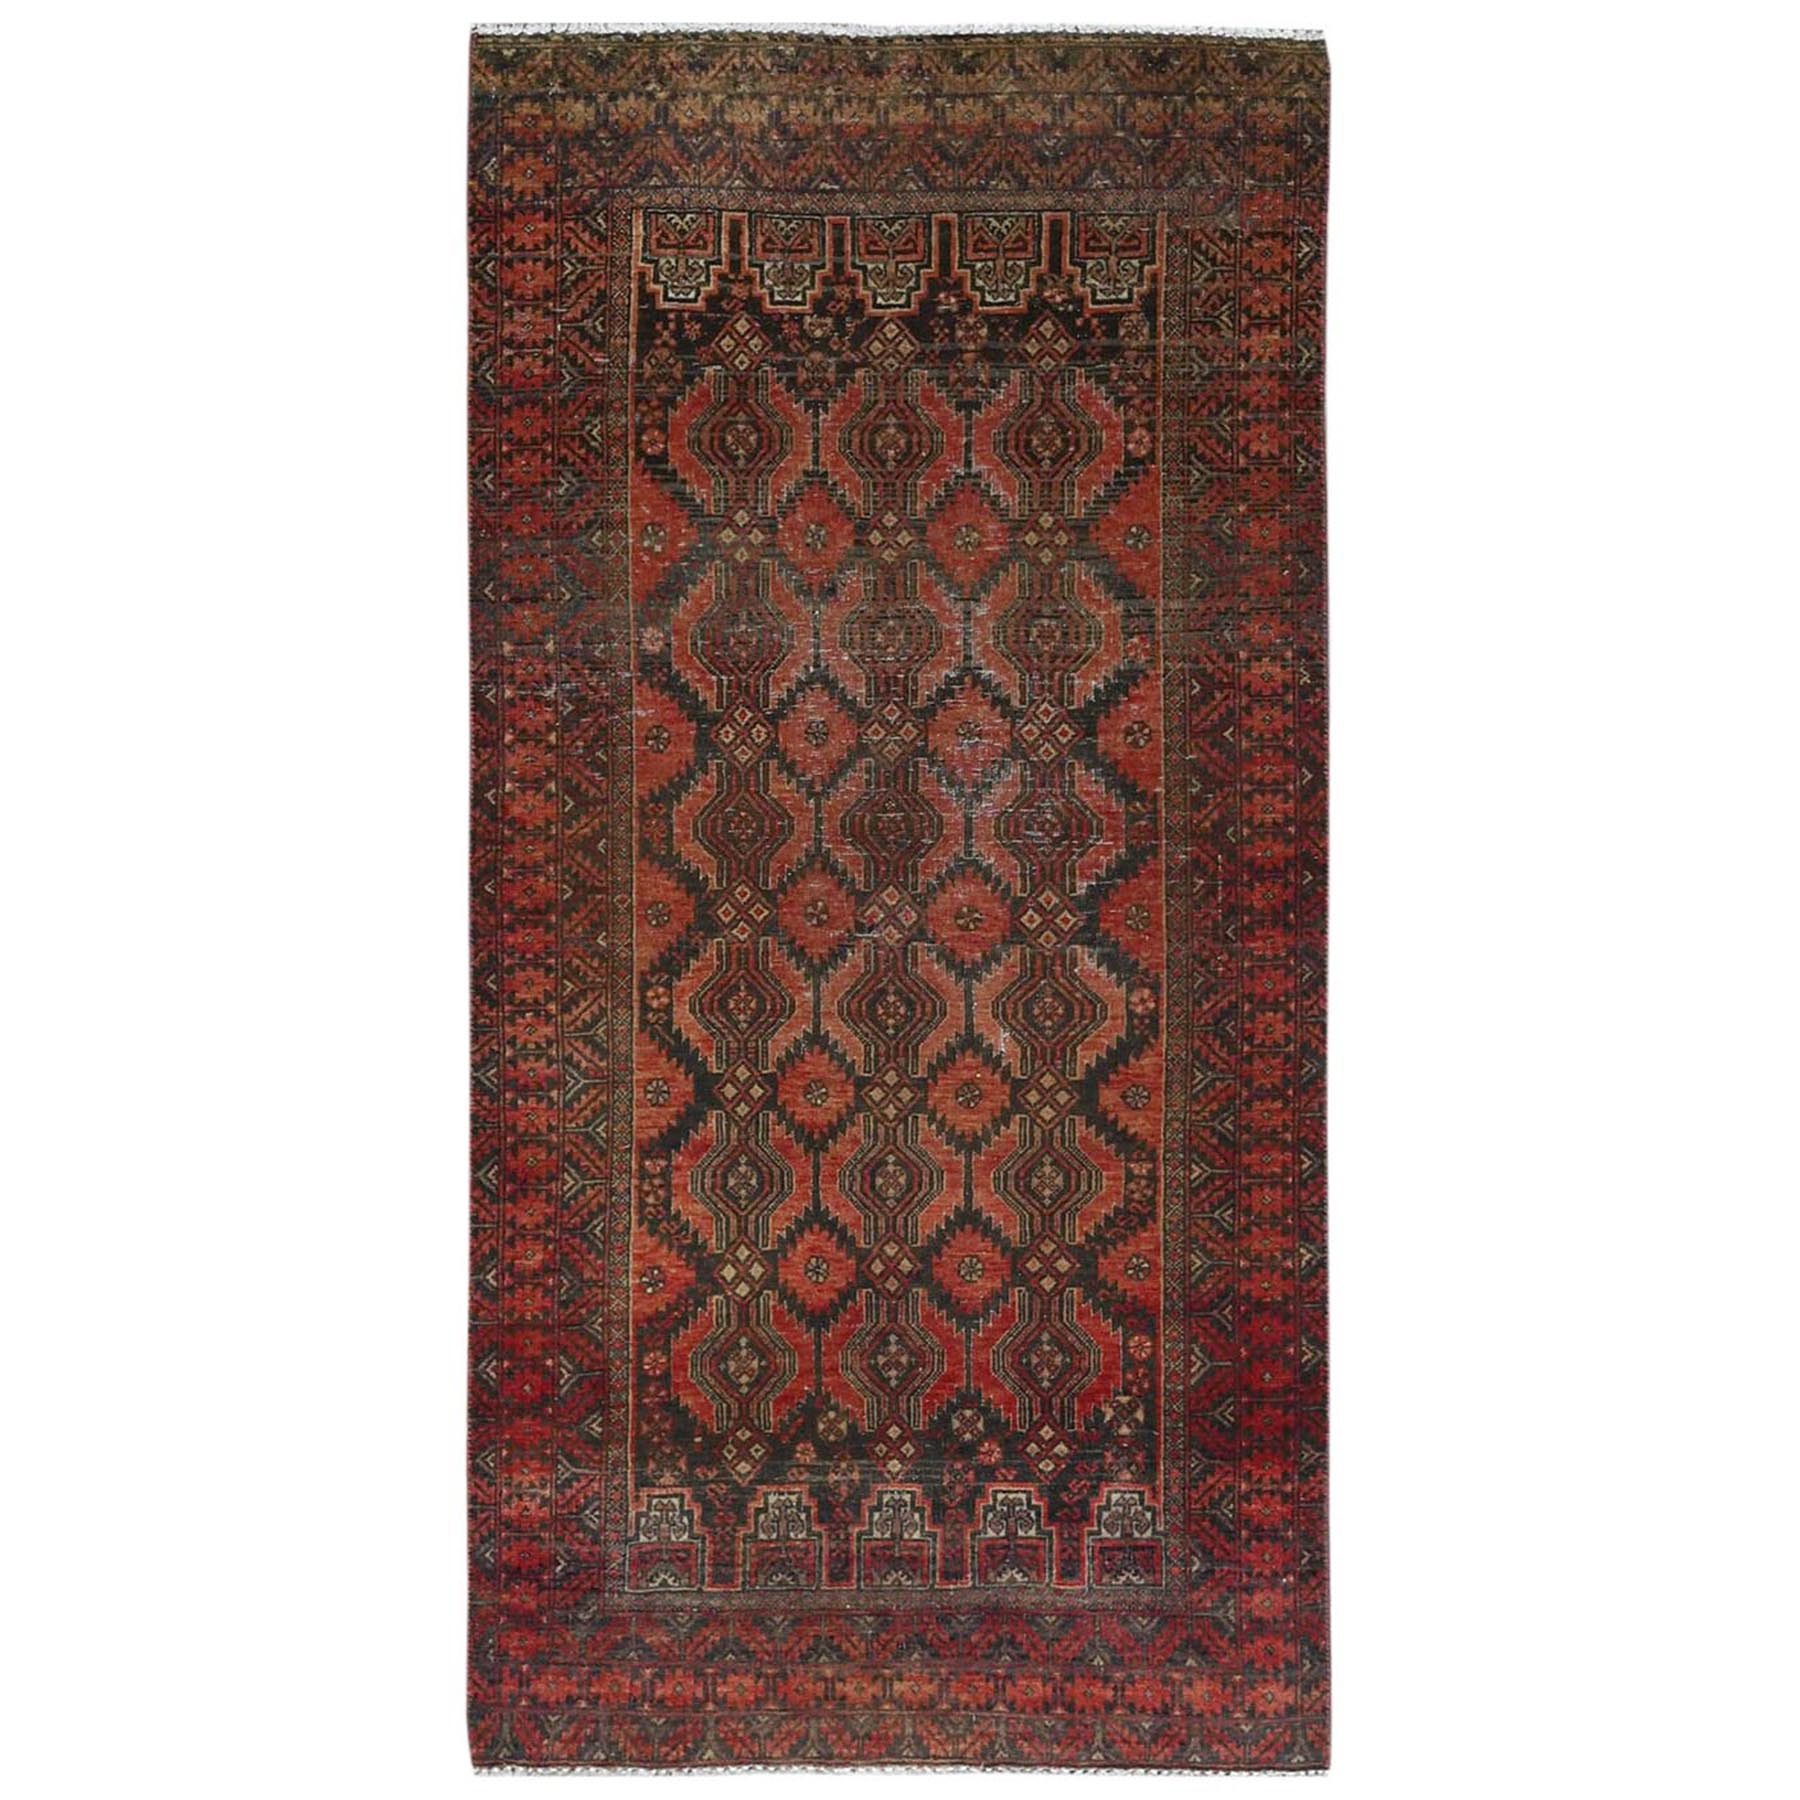  Wool Hand-Knotted Area Rug 2'9